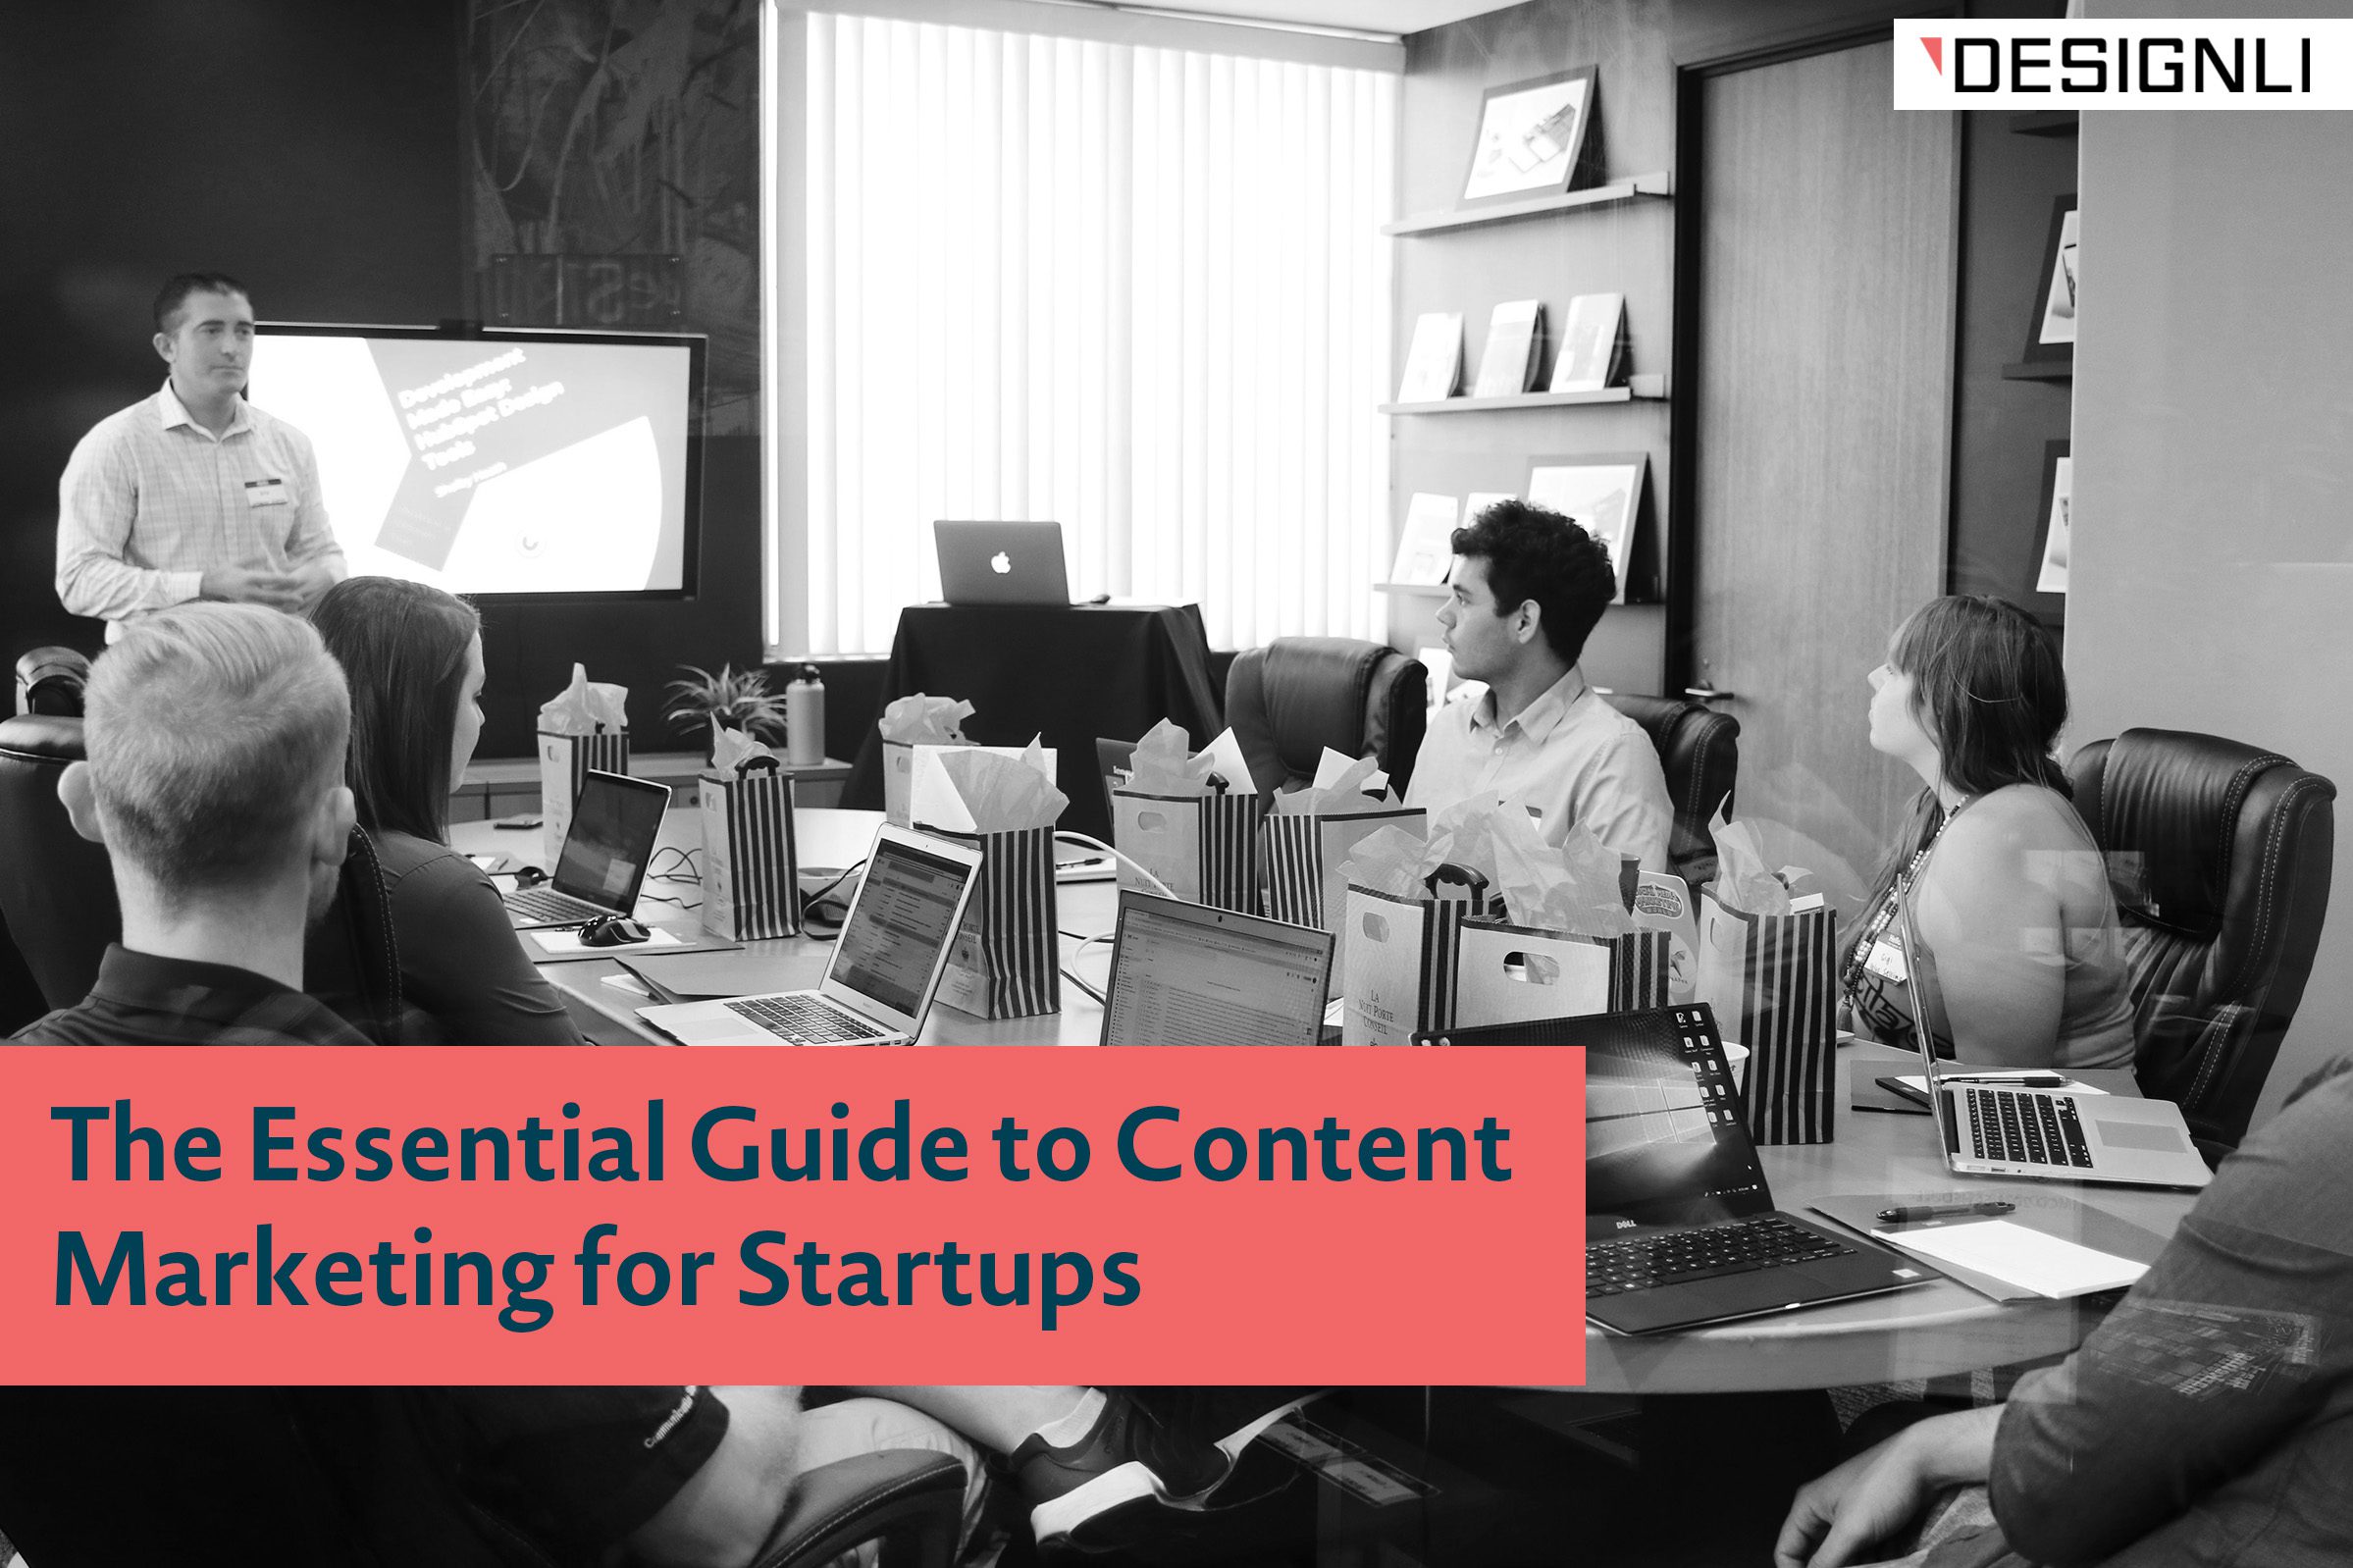 The Essential Guide to Content Marketing for Startups